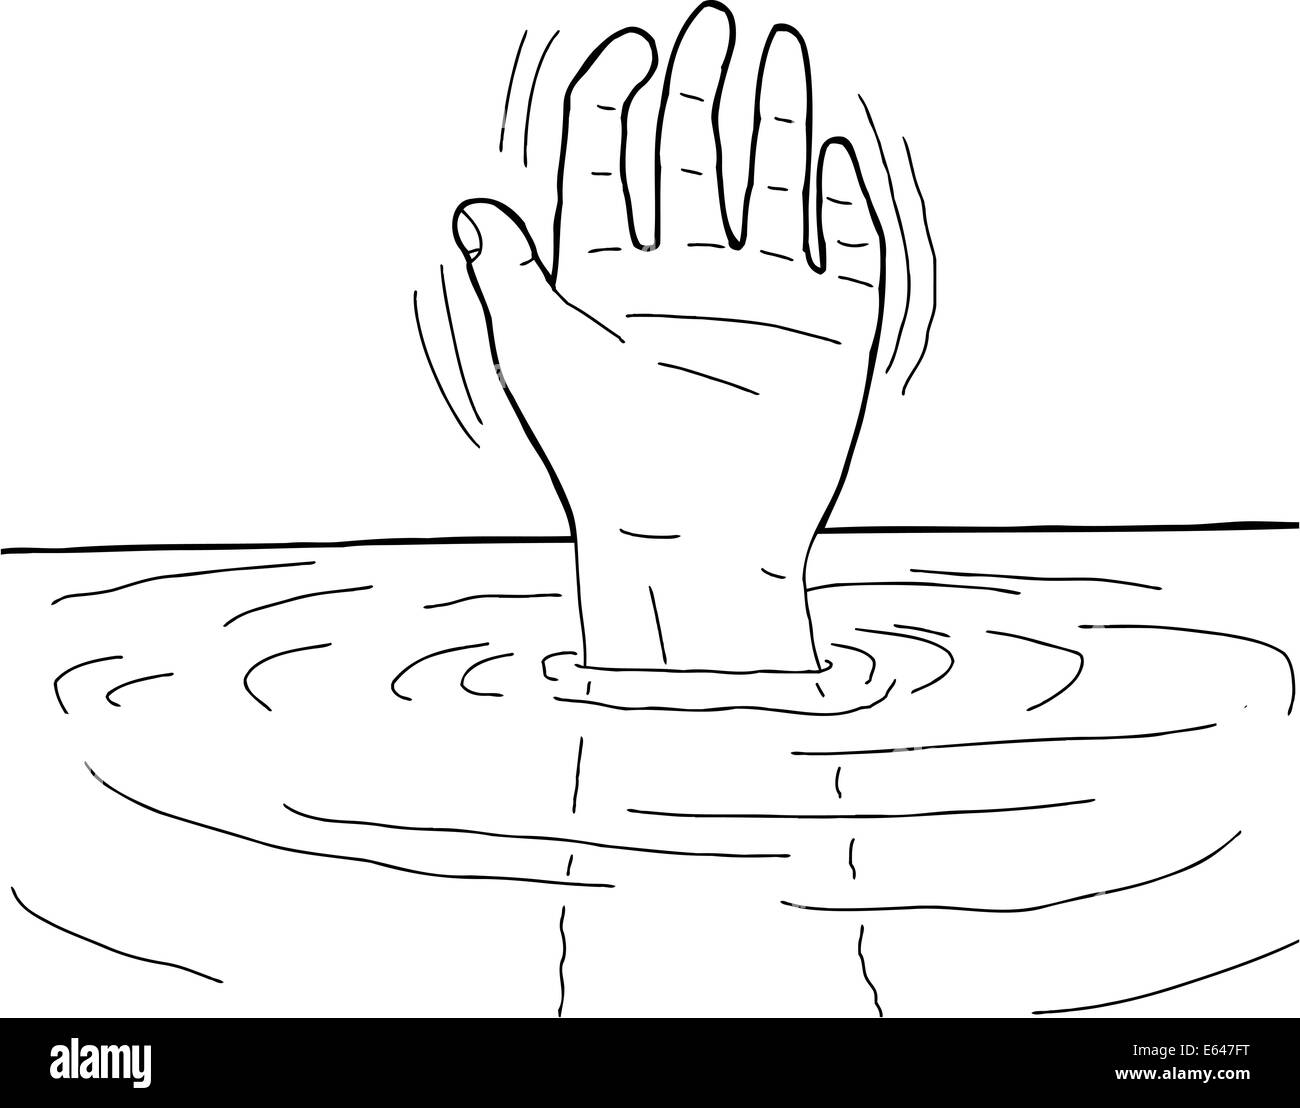 Hand Reaching Out Of The Sea Stock Photos & Hand Reaching Out Of The ...